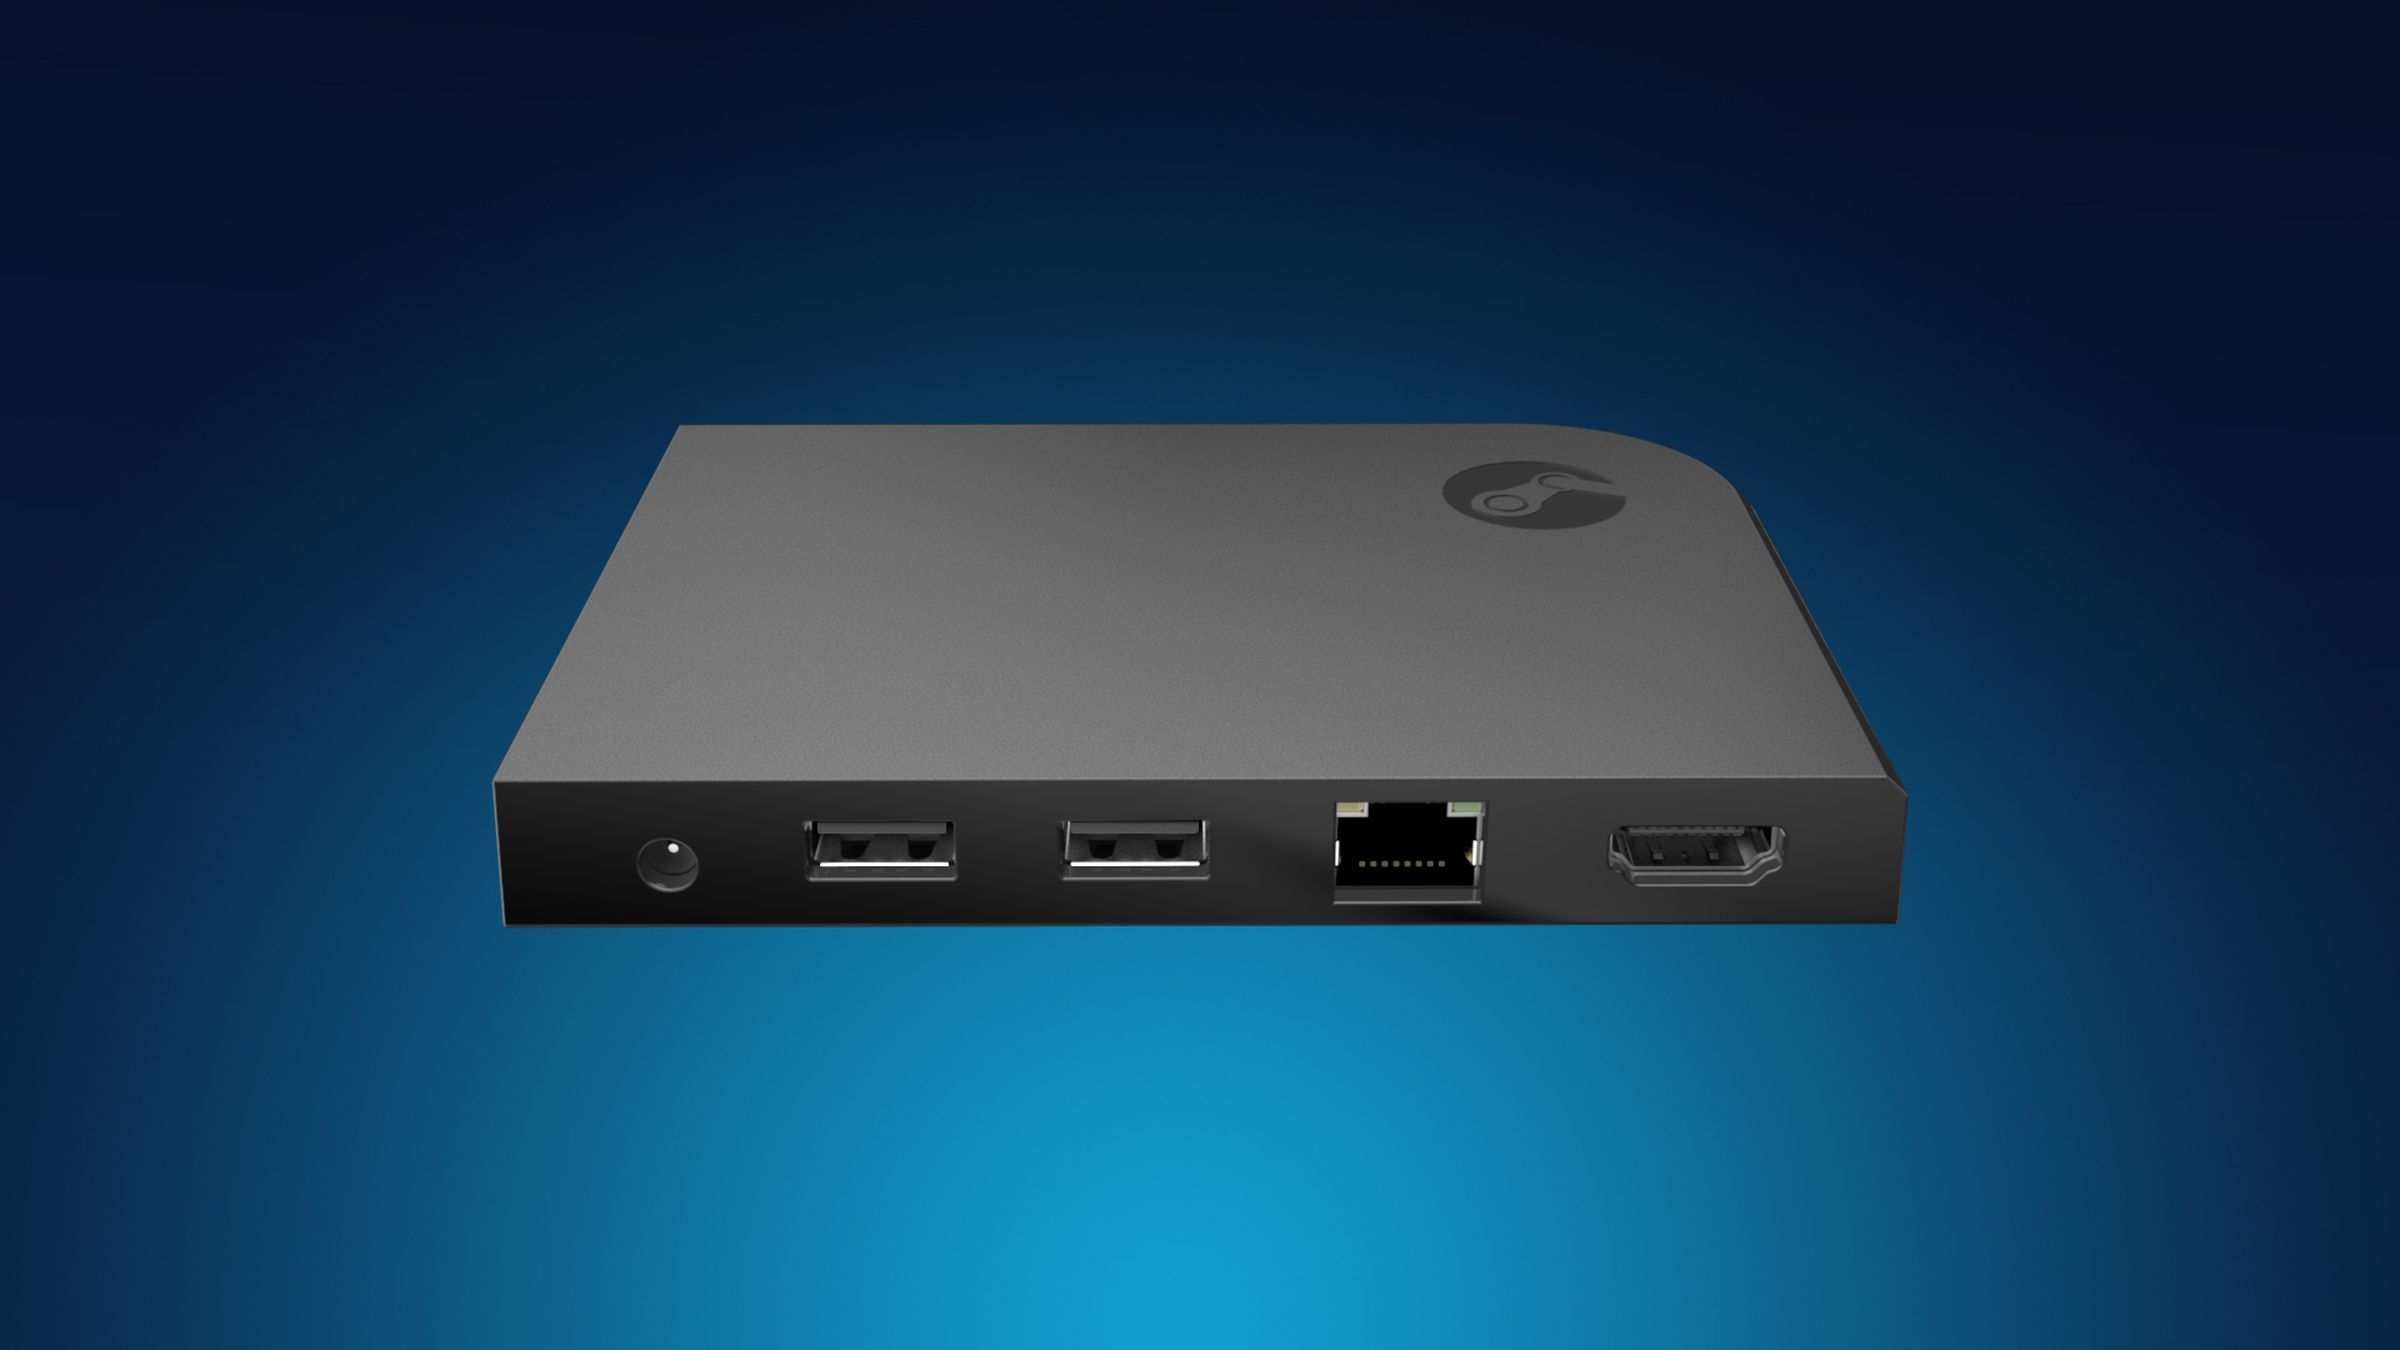 A Steam link on a blue background.